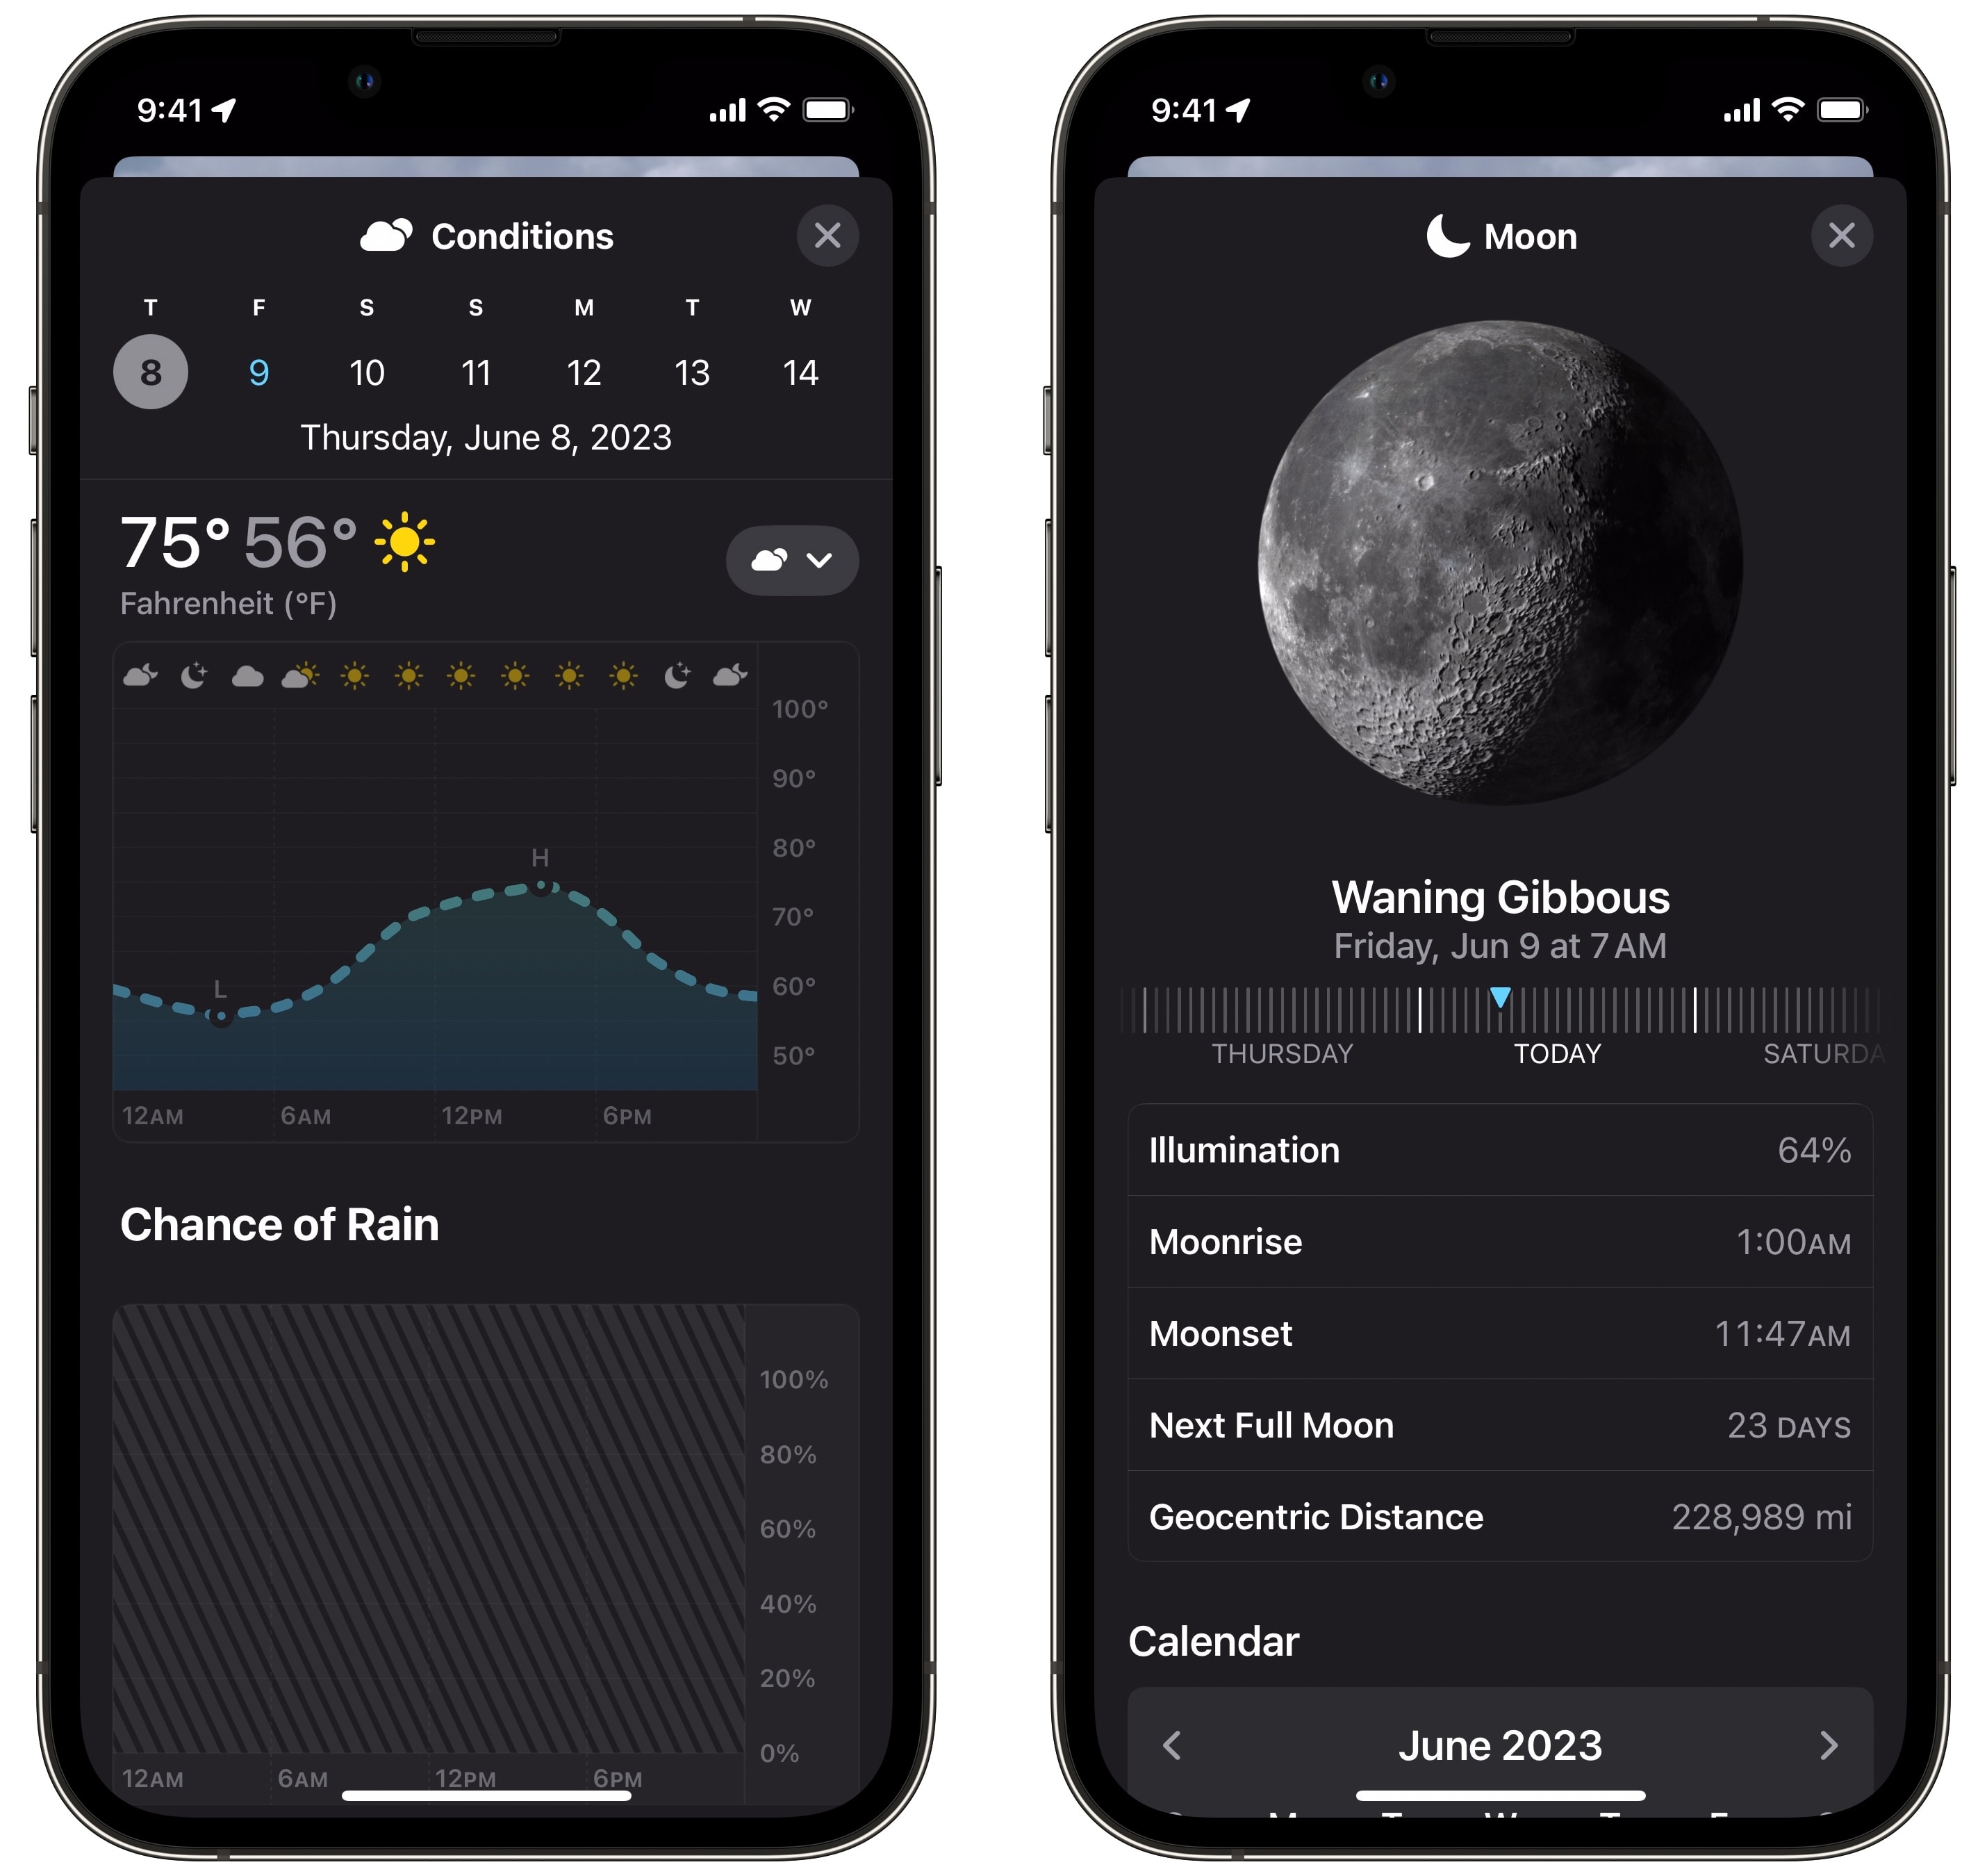 See yesterday’s weather data or the phases of the moon in Weather.